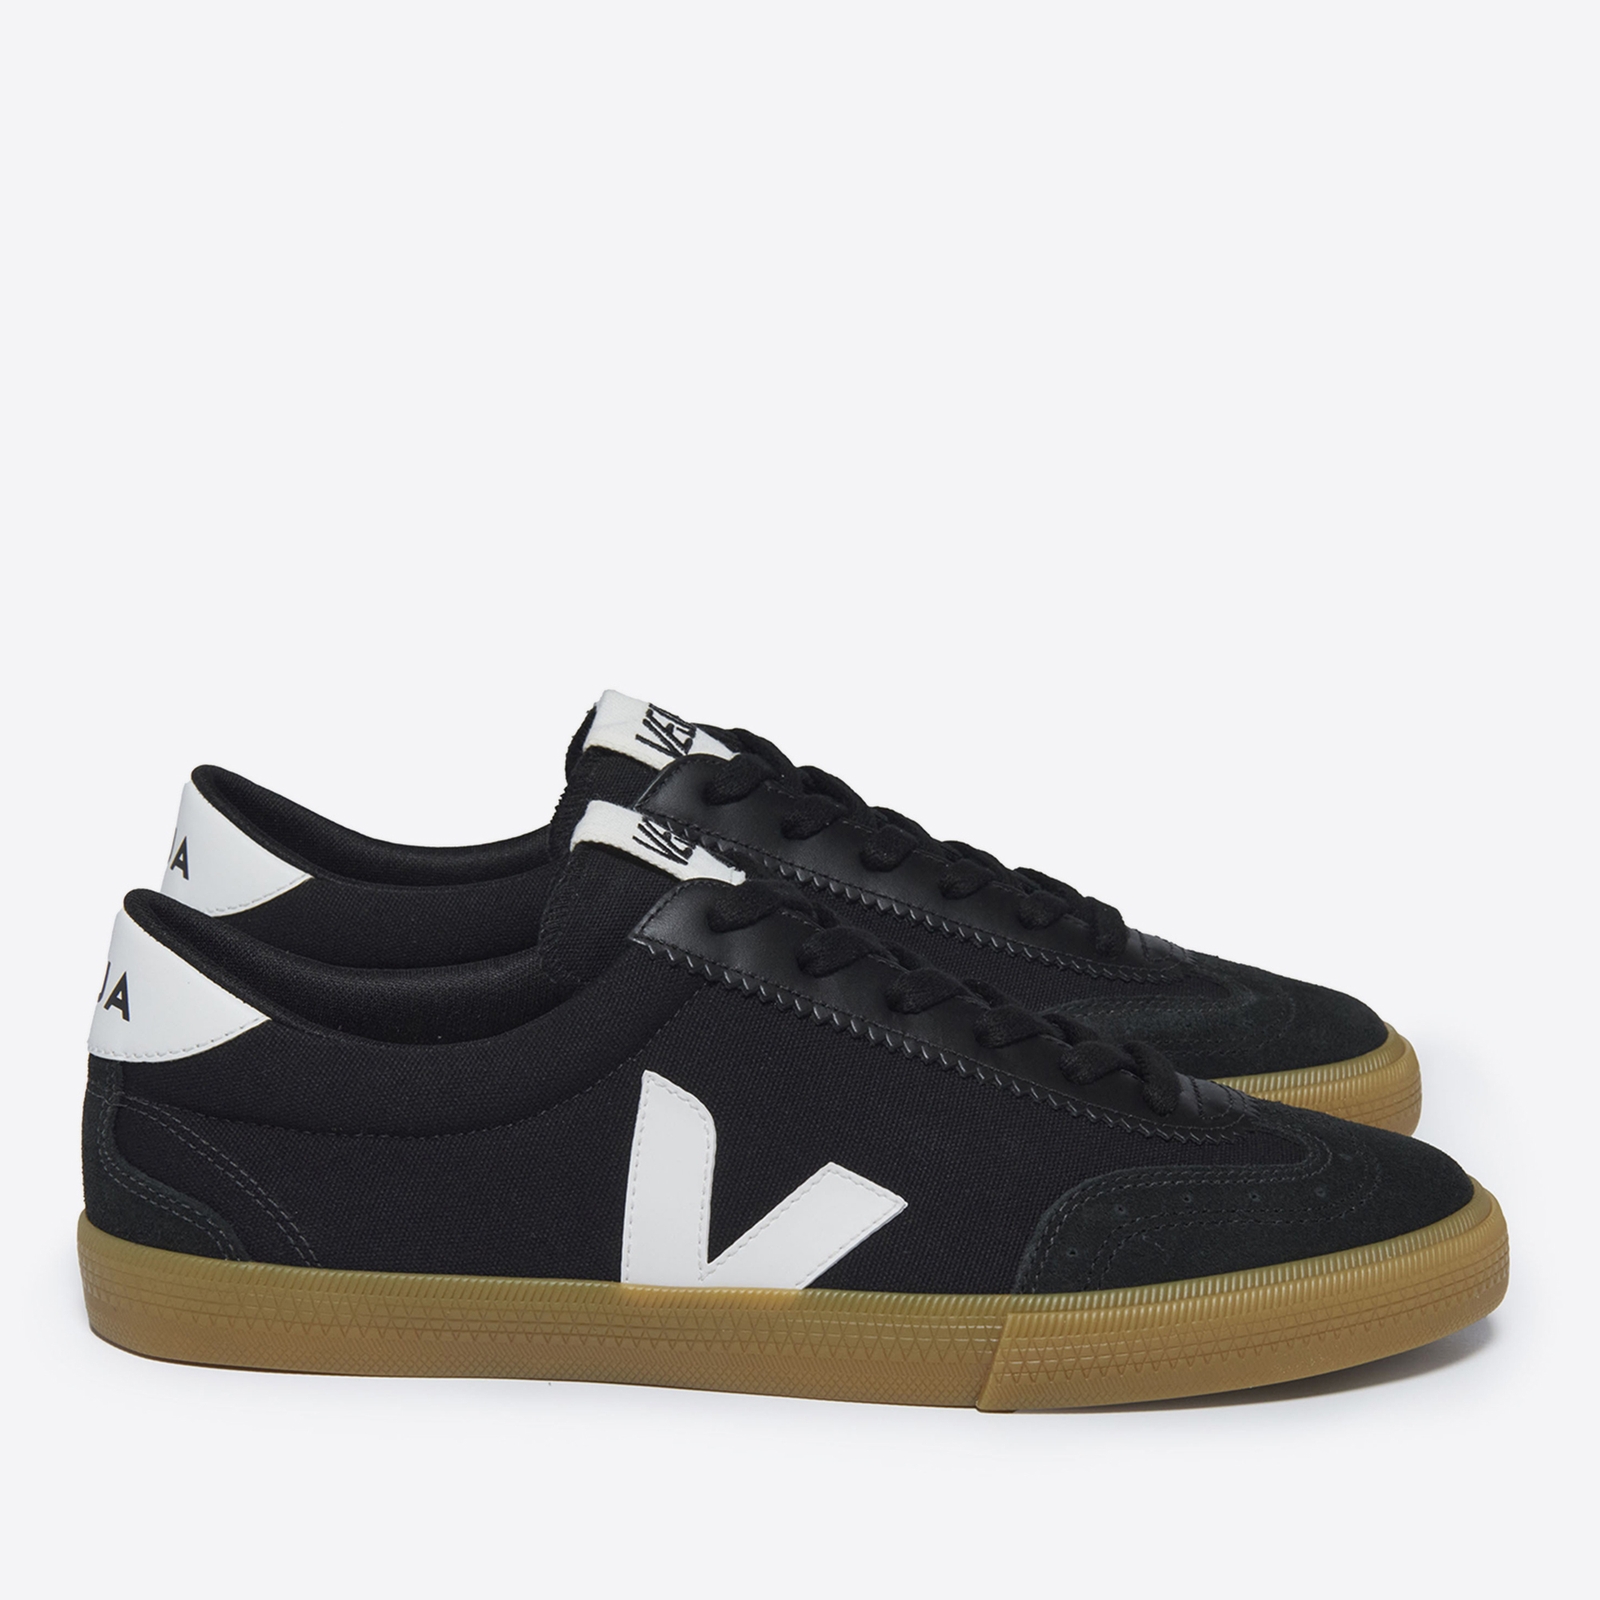 Veja Men's Volley Low Top Trainers - Black/White/Natural - UK 7